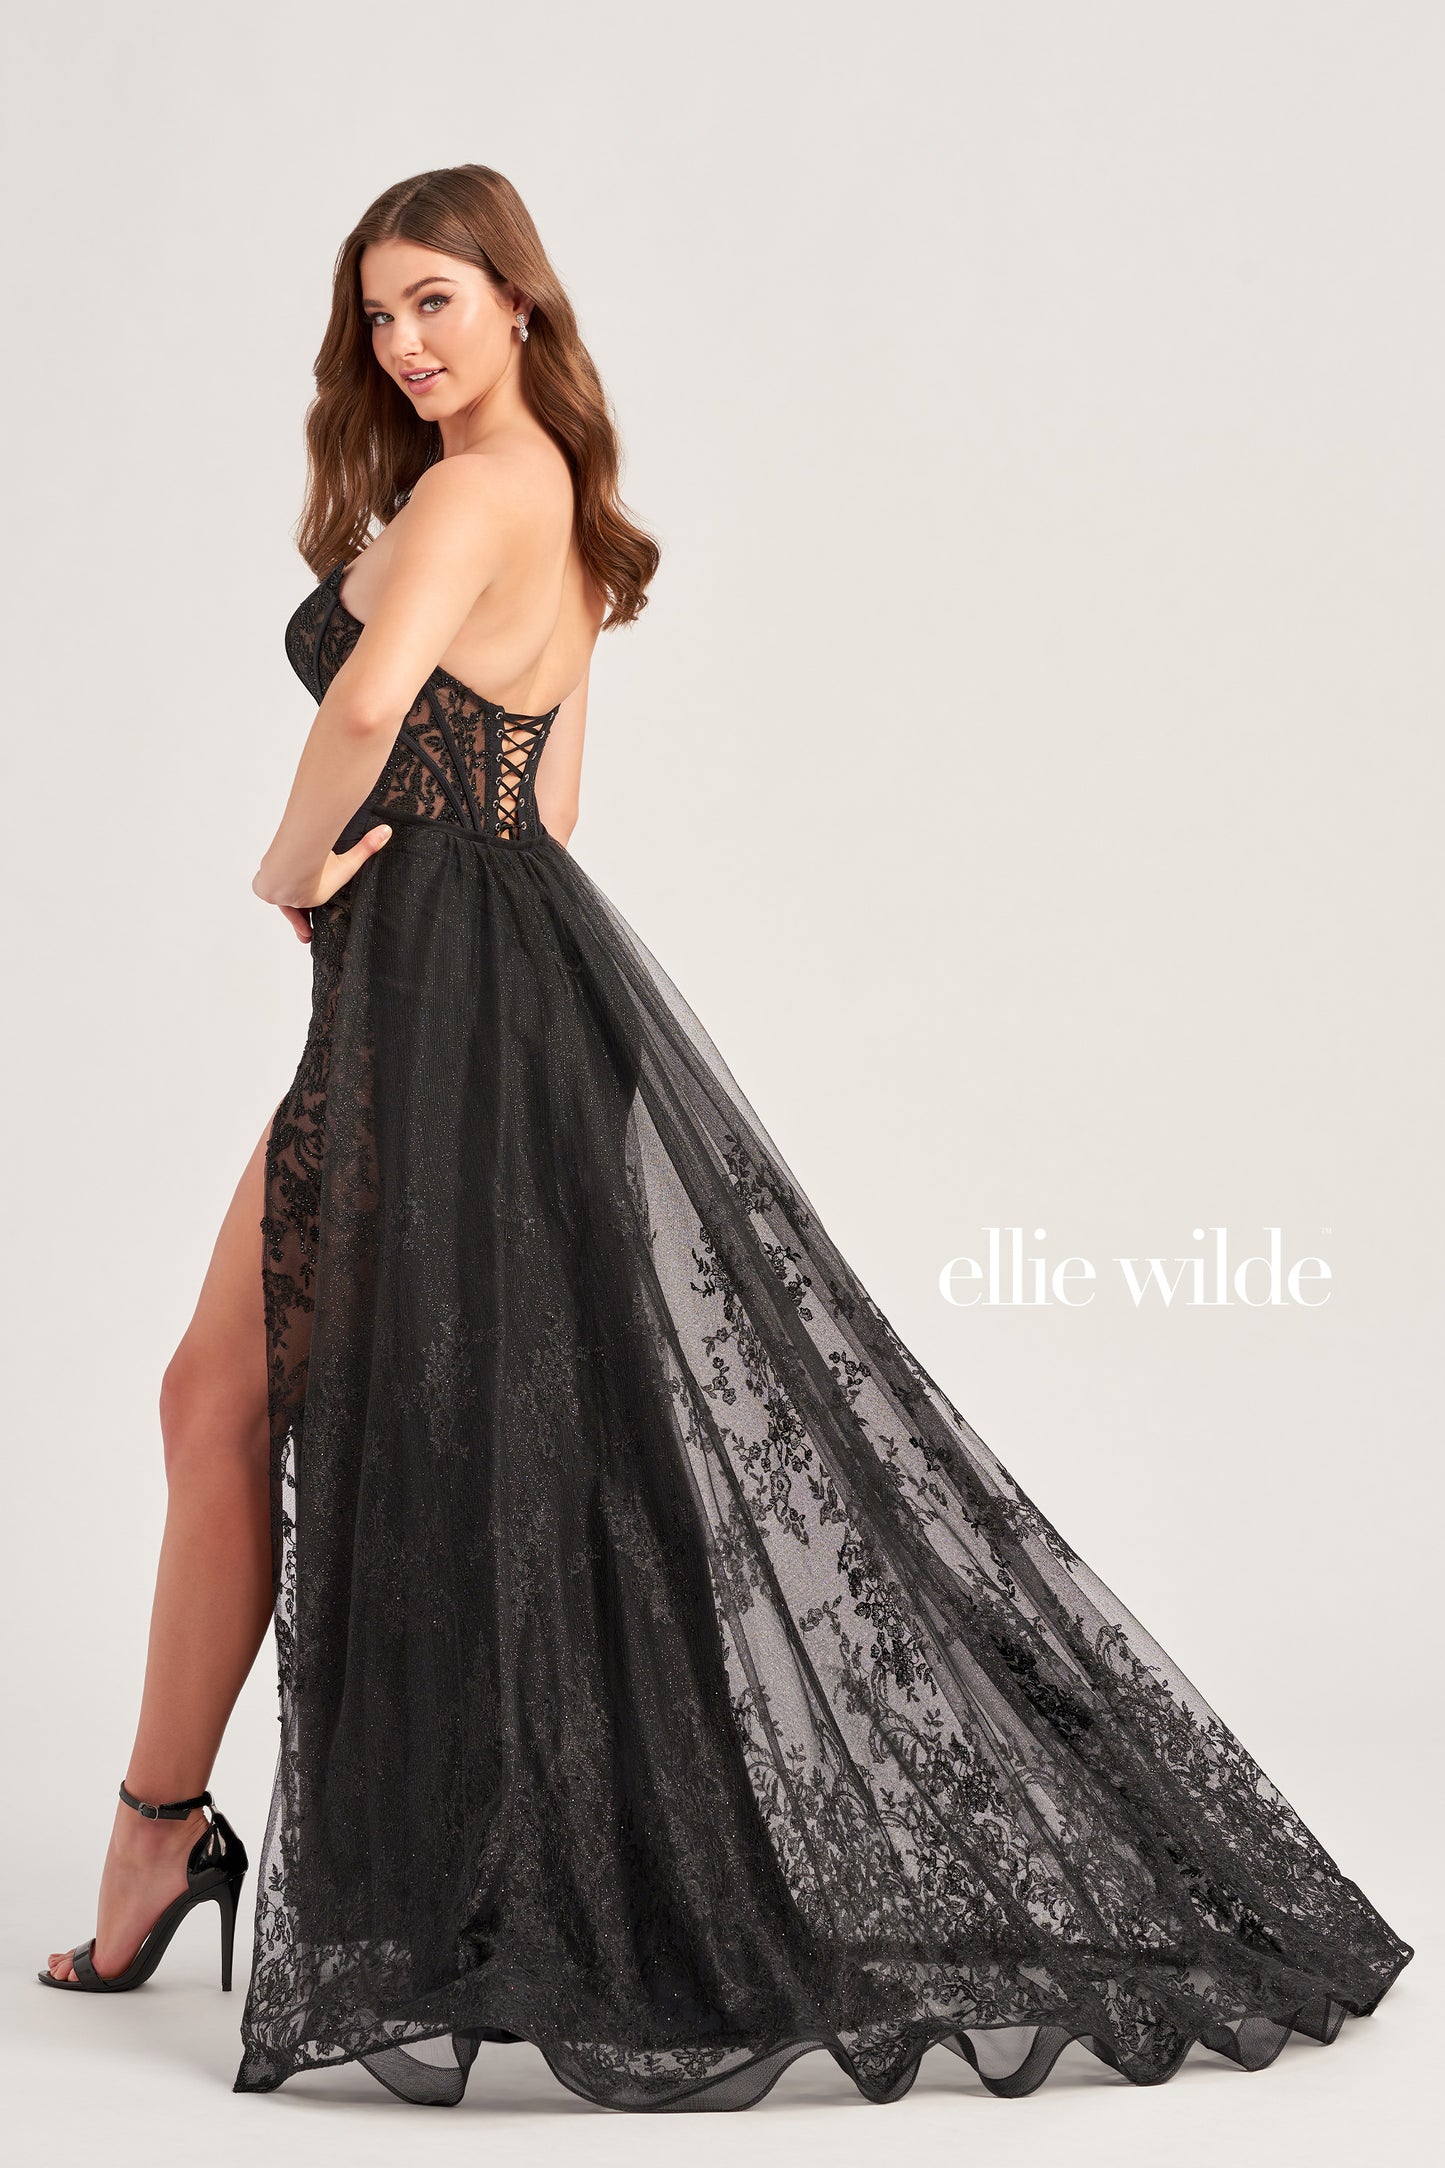 Be prepared to stun in this Ellie Wilde EW35032 long prom dress. Featuring a scoop neckline, glitter lace and stone accents, with a lace up grommet back and high slit for added flair. The corset bodice and detachable train ensure you make a statement. Crafted with stretch jersey for a comfortable fit-and-flare silhouette.  COLOR: BLACK, EMERALD, ROYAL BLUE, RUBY, IRIS, WHITE